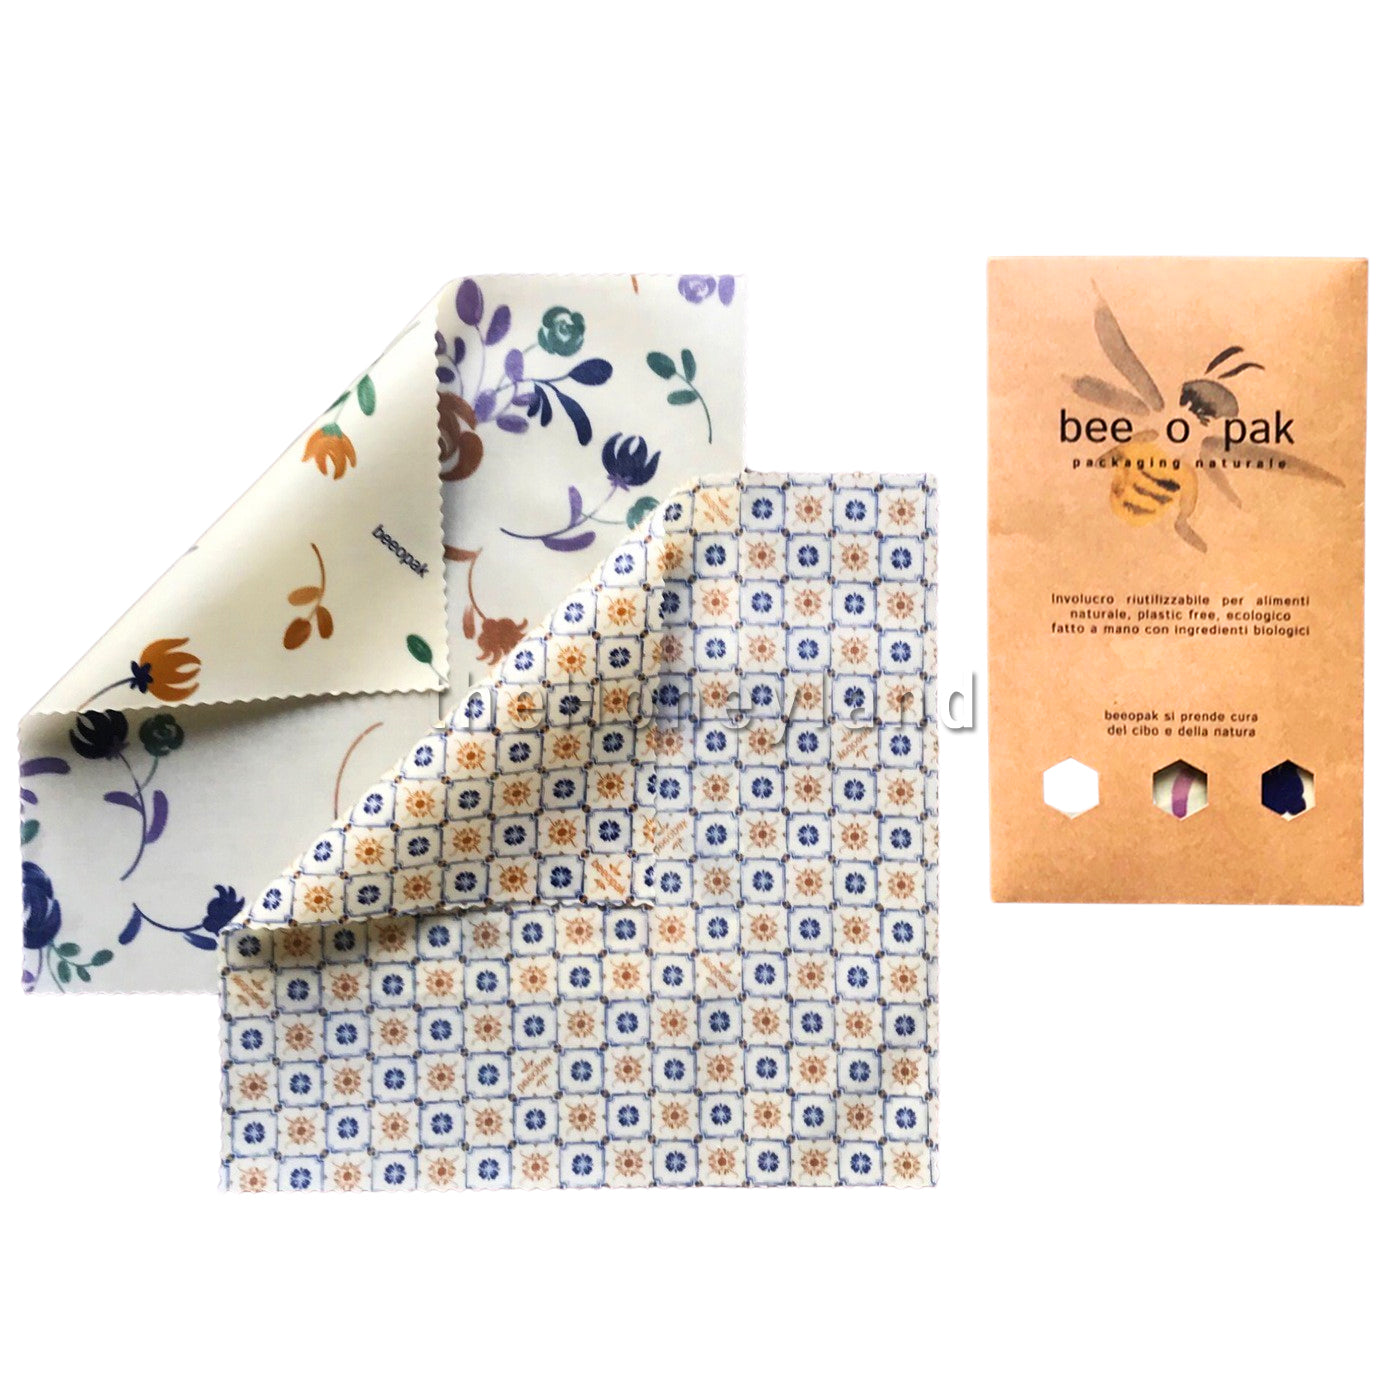 Beeopak Medium - Natural Wrapper with organic beeswax